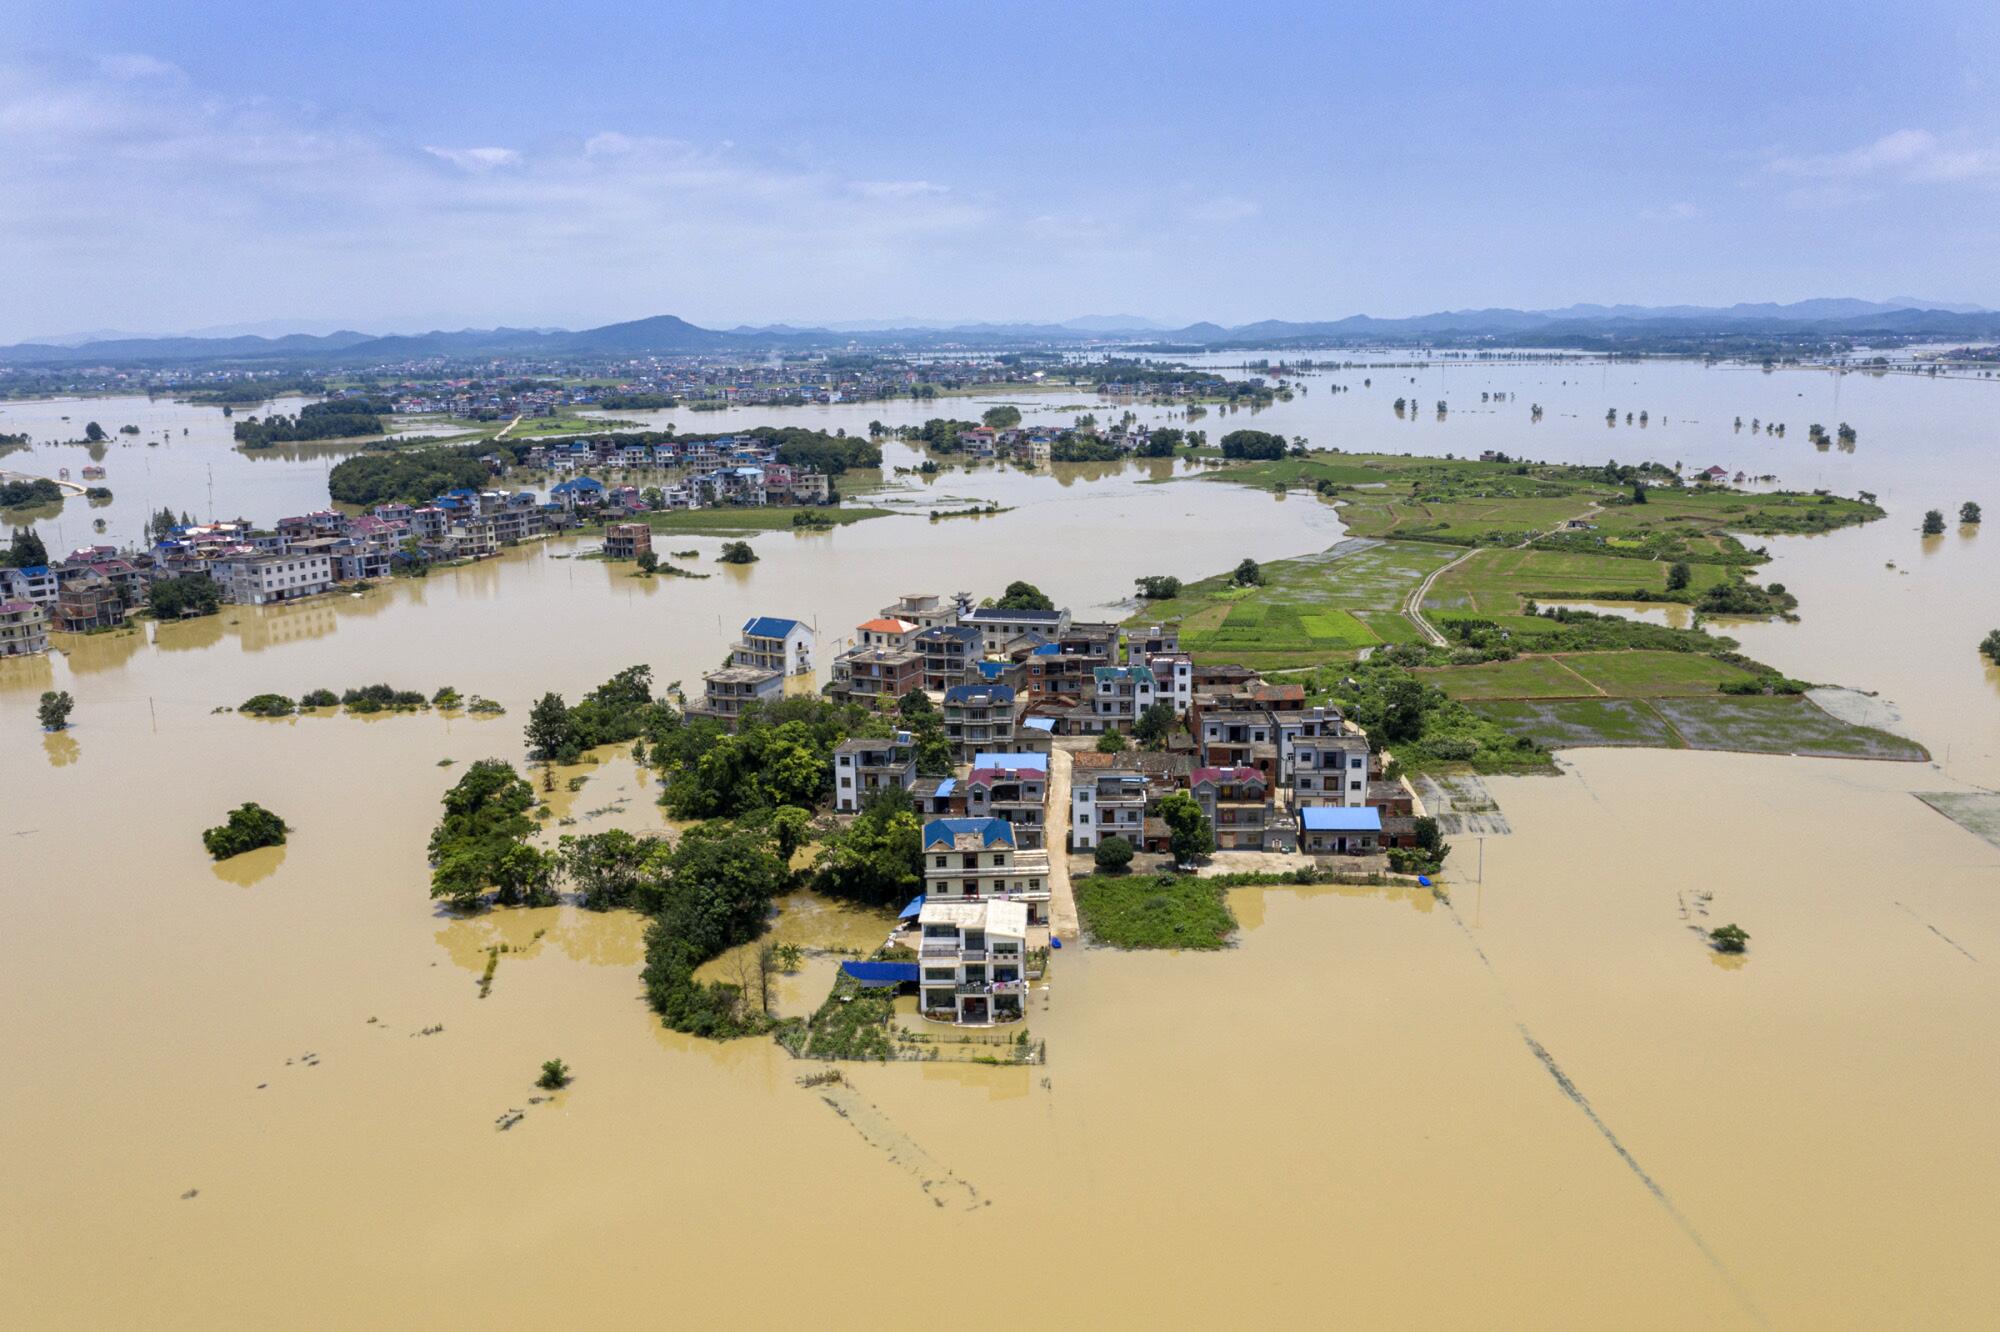 The flooding has turned Chengjiacun village into an island.